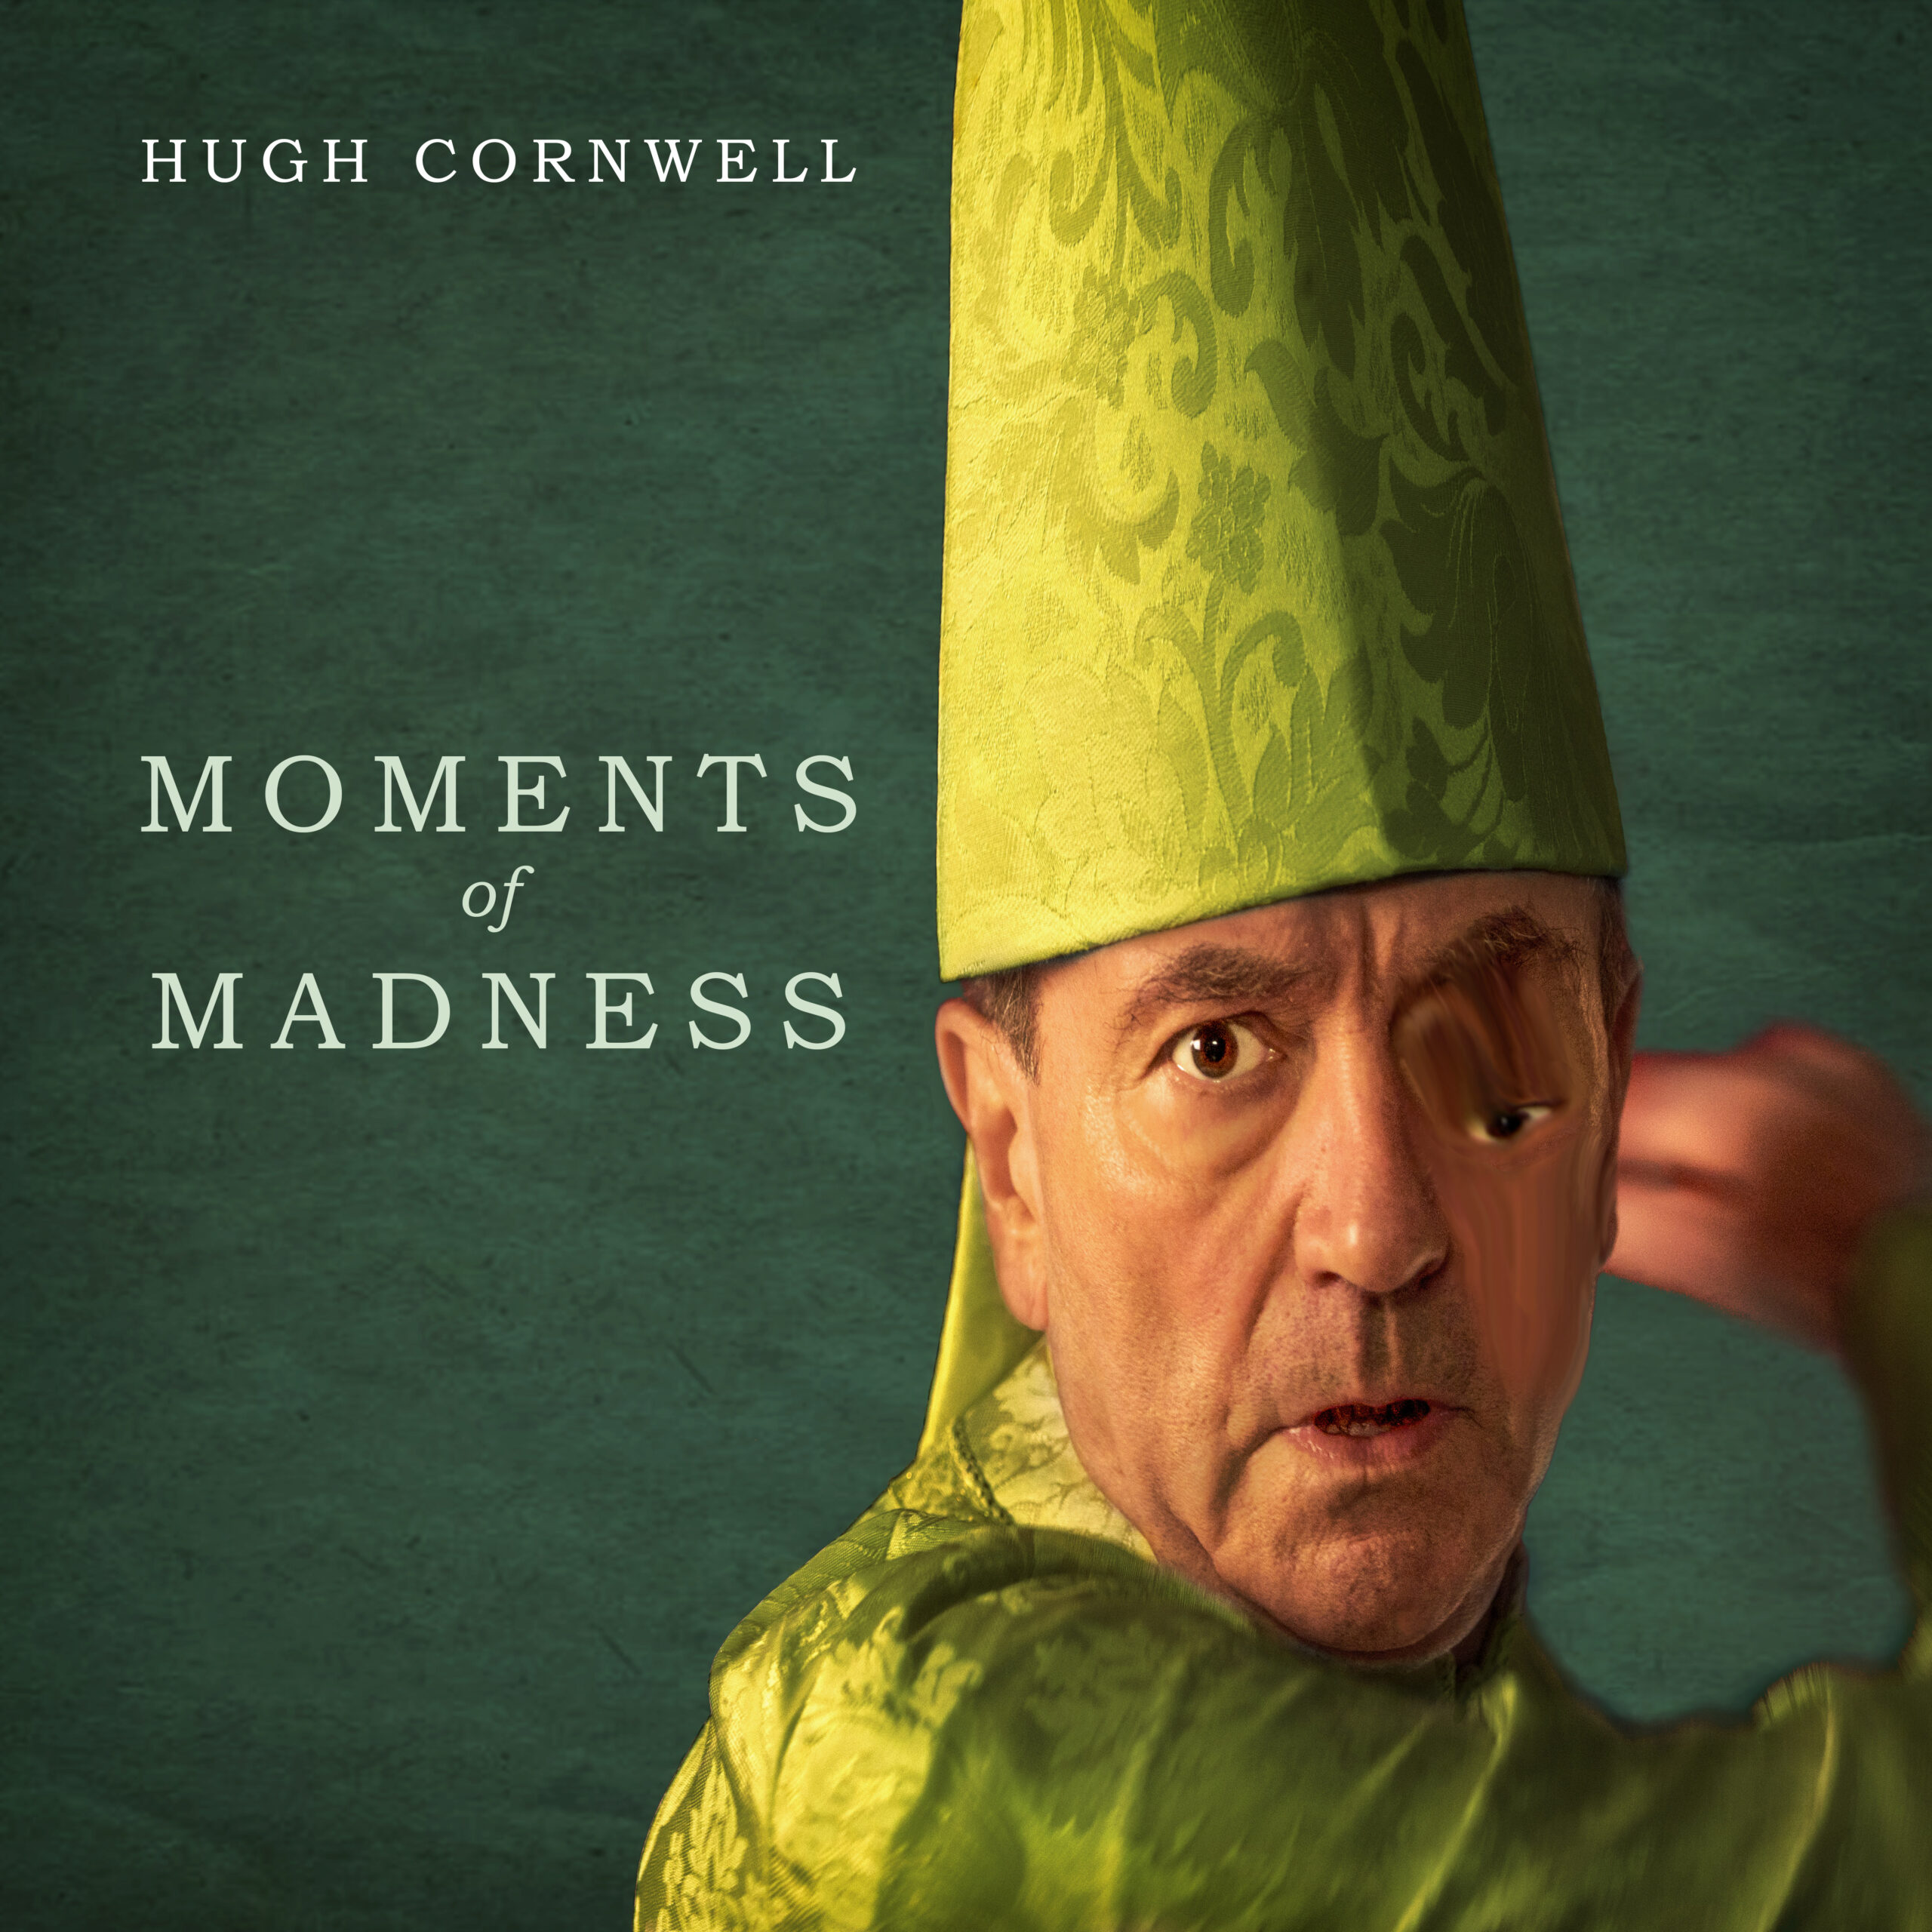 Hugh Cornwell’s new album “Moments Of Madness” is available now!